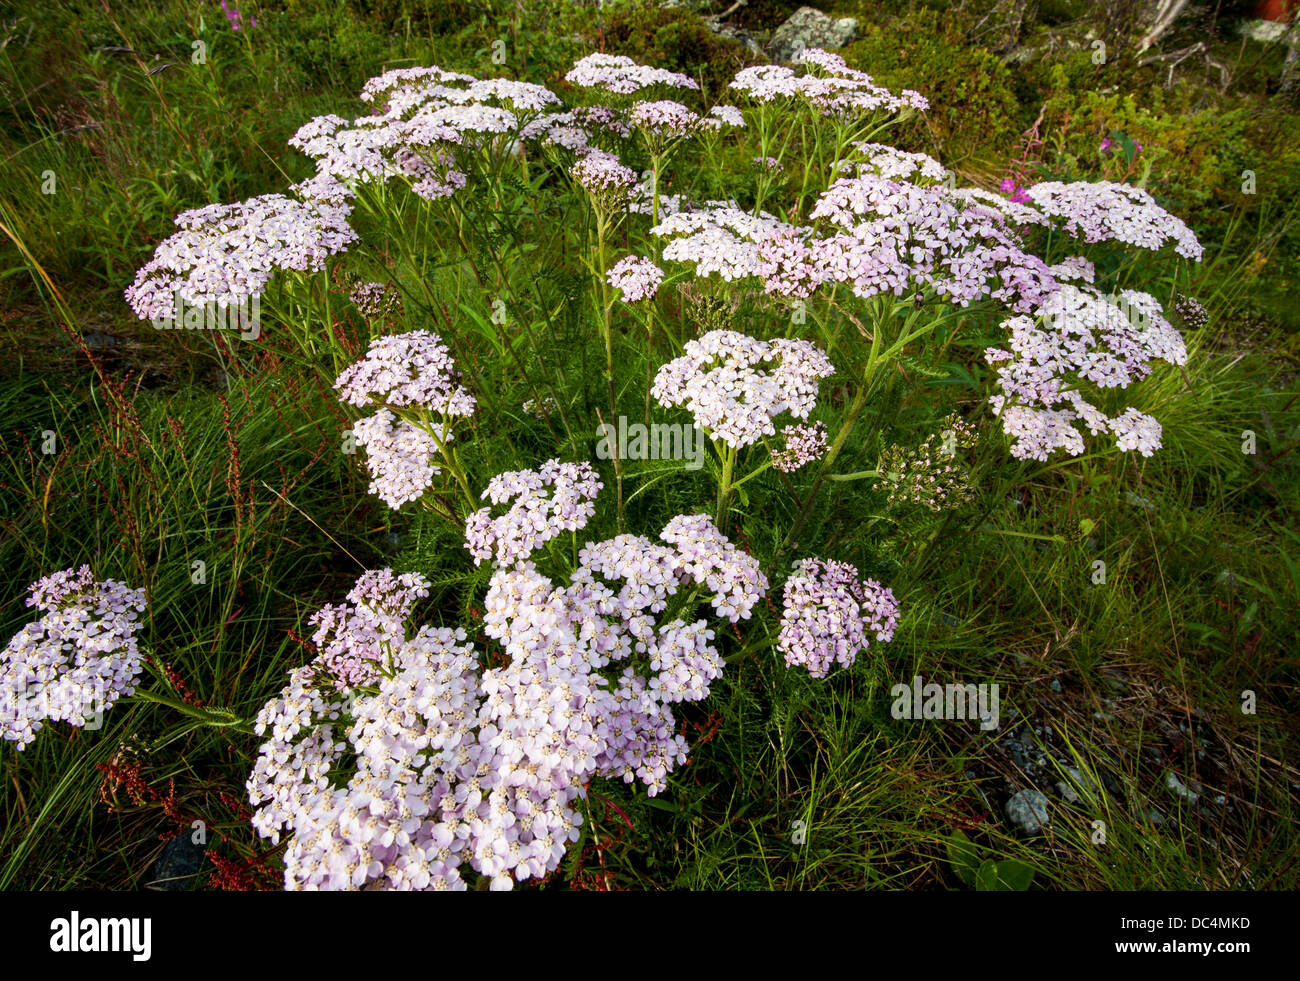 Pink and white achillea yarrow plants growing asteraceae flowers